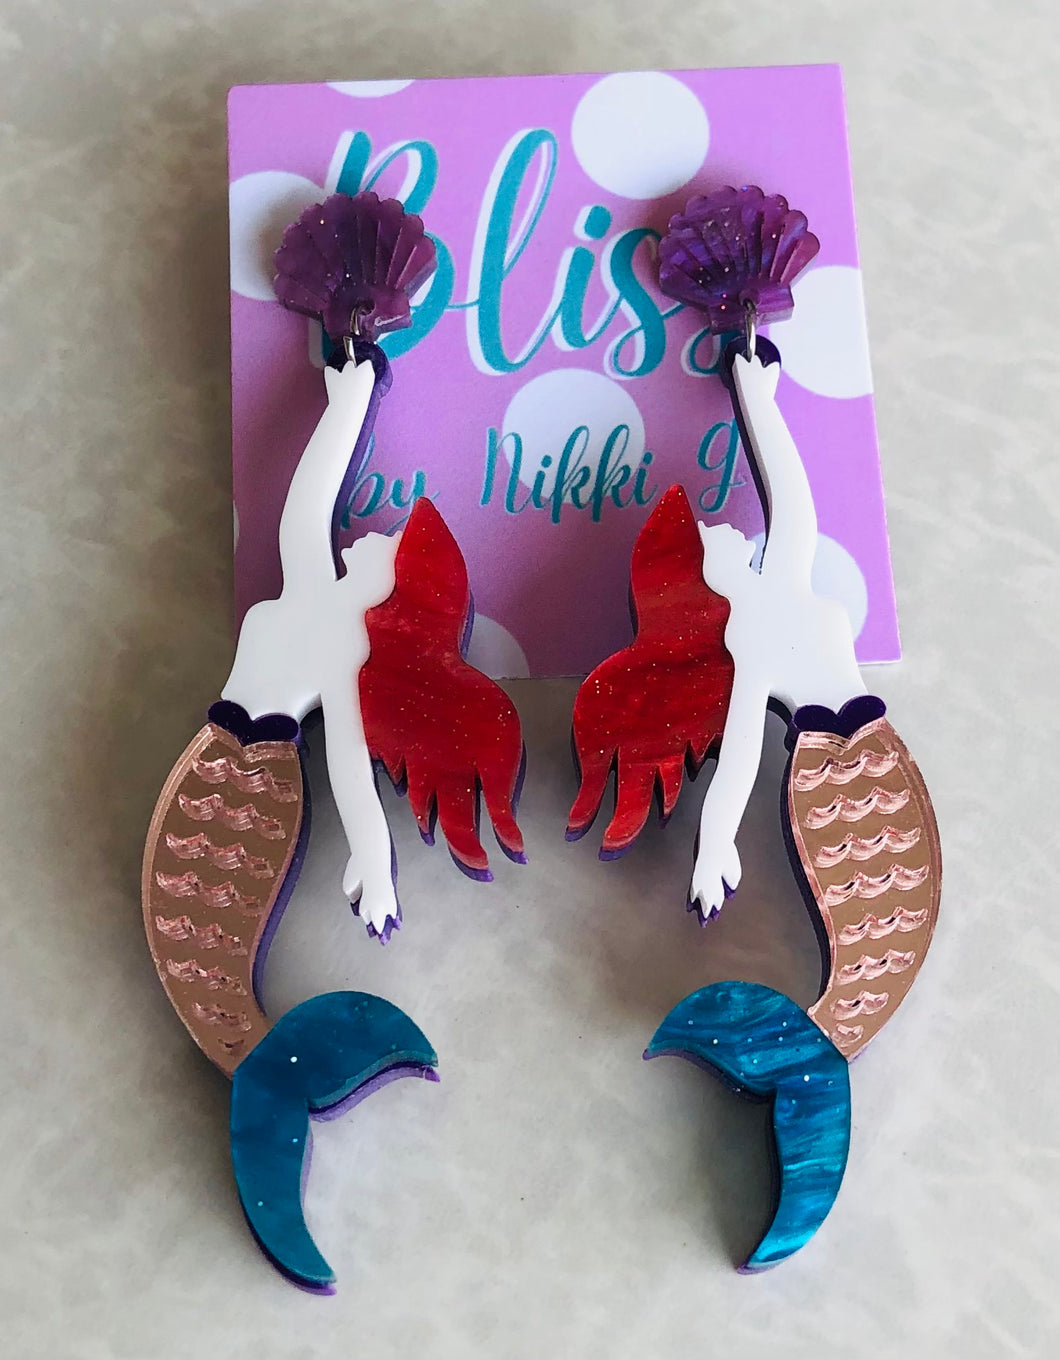 Mermaid holding a Shell Acrylic Statement Earring